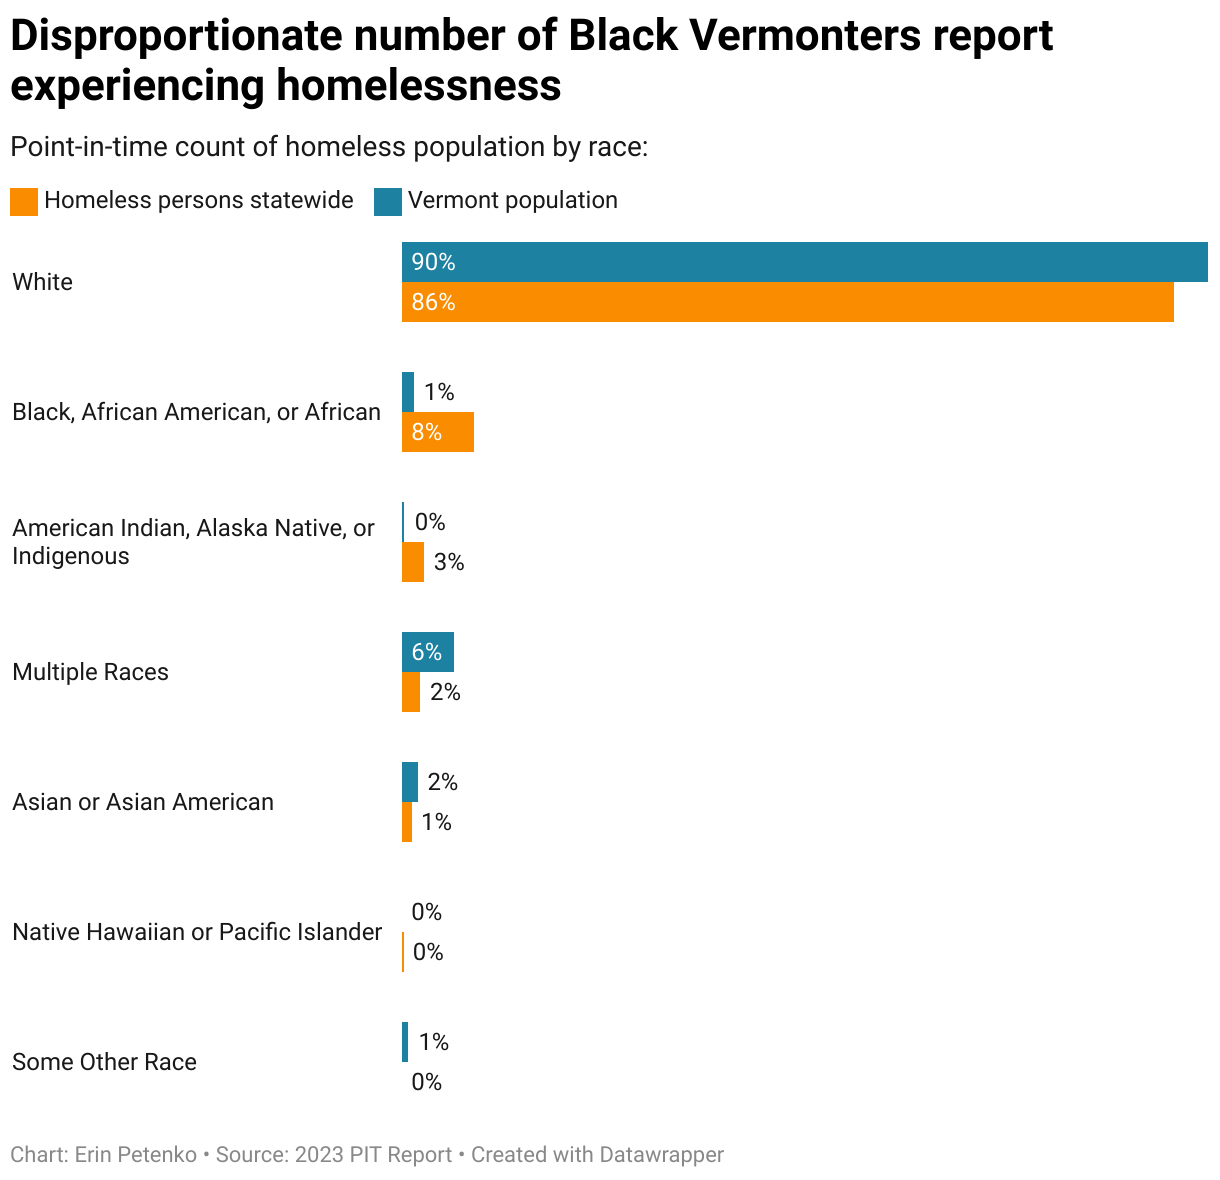 8% of people experiencing homelessness were Black, compared with 1% of the overall Vermont population.